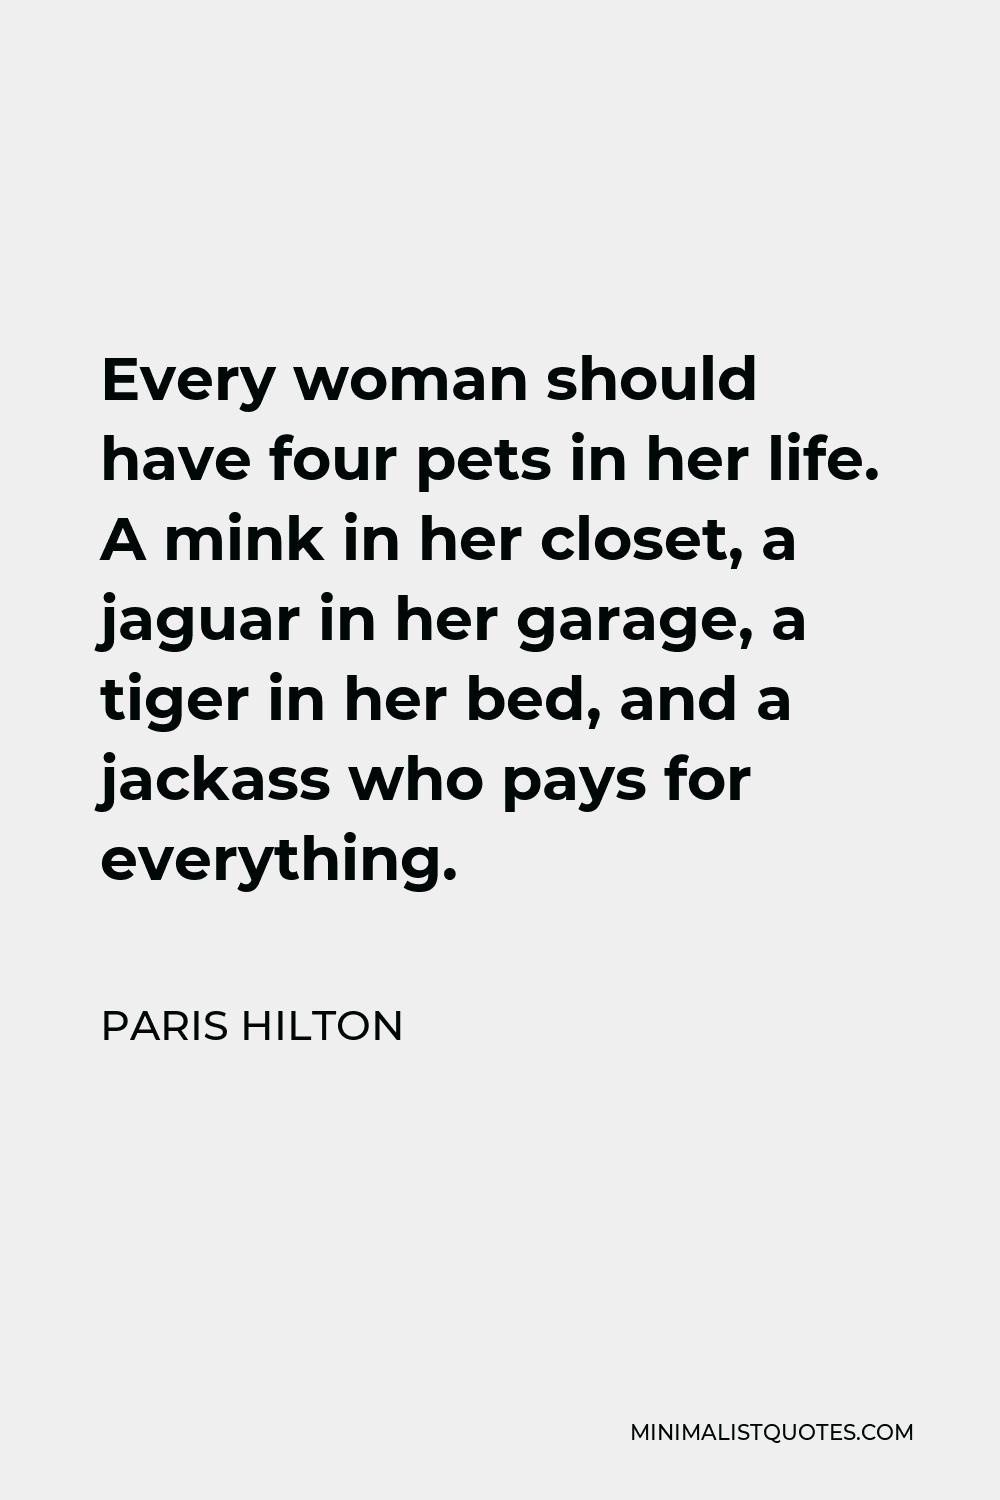 Every woman should have four pets in her - Quote